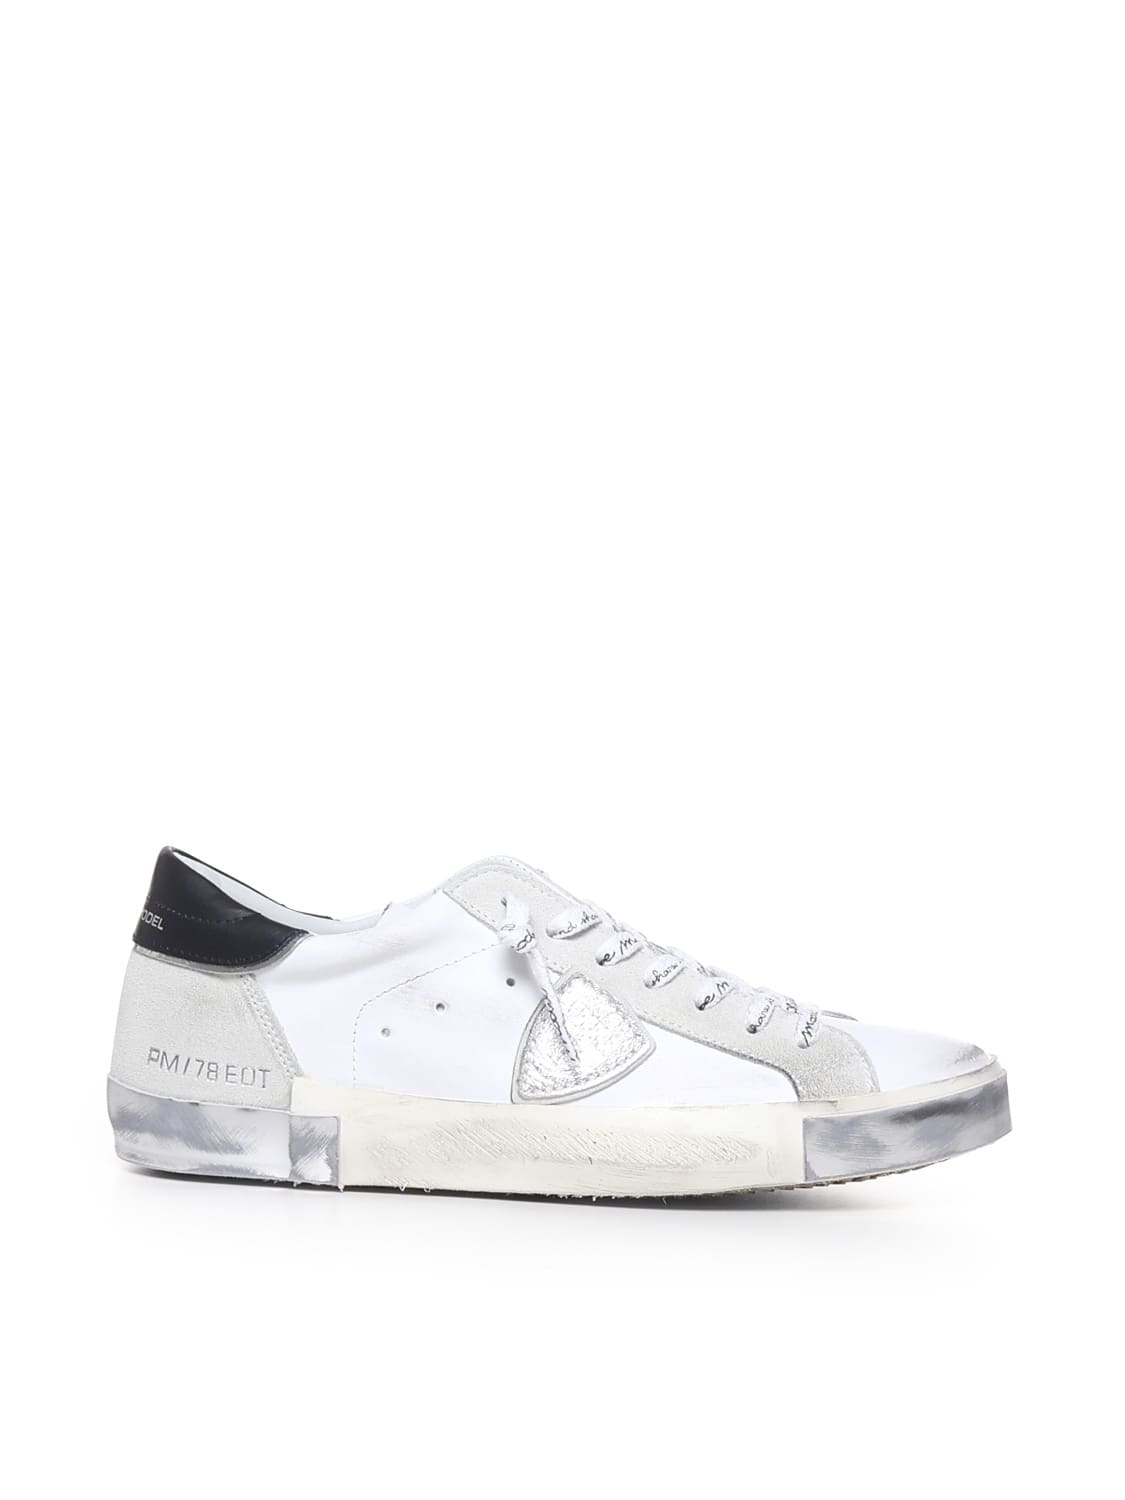 Parisx Sneakers In Leather With Contrasting Heel Tab